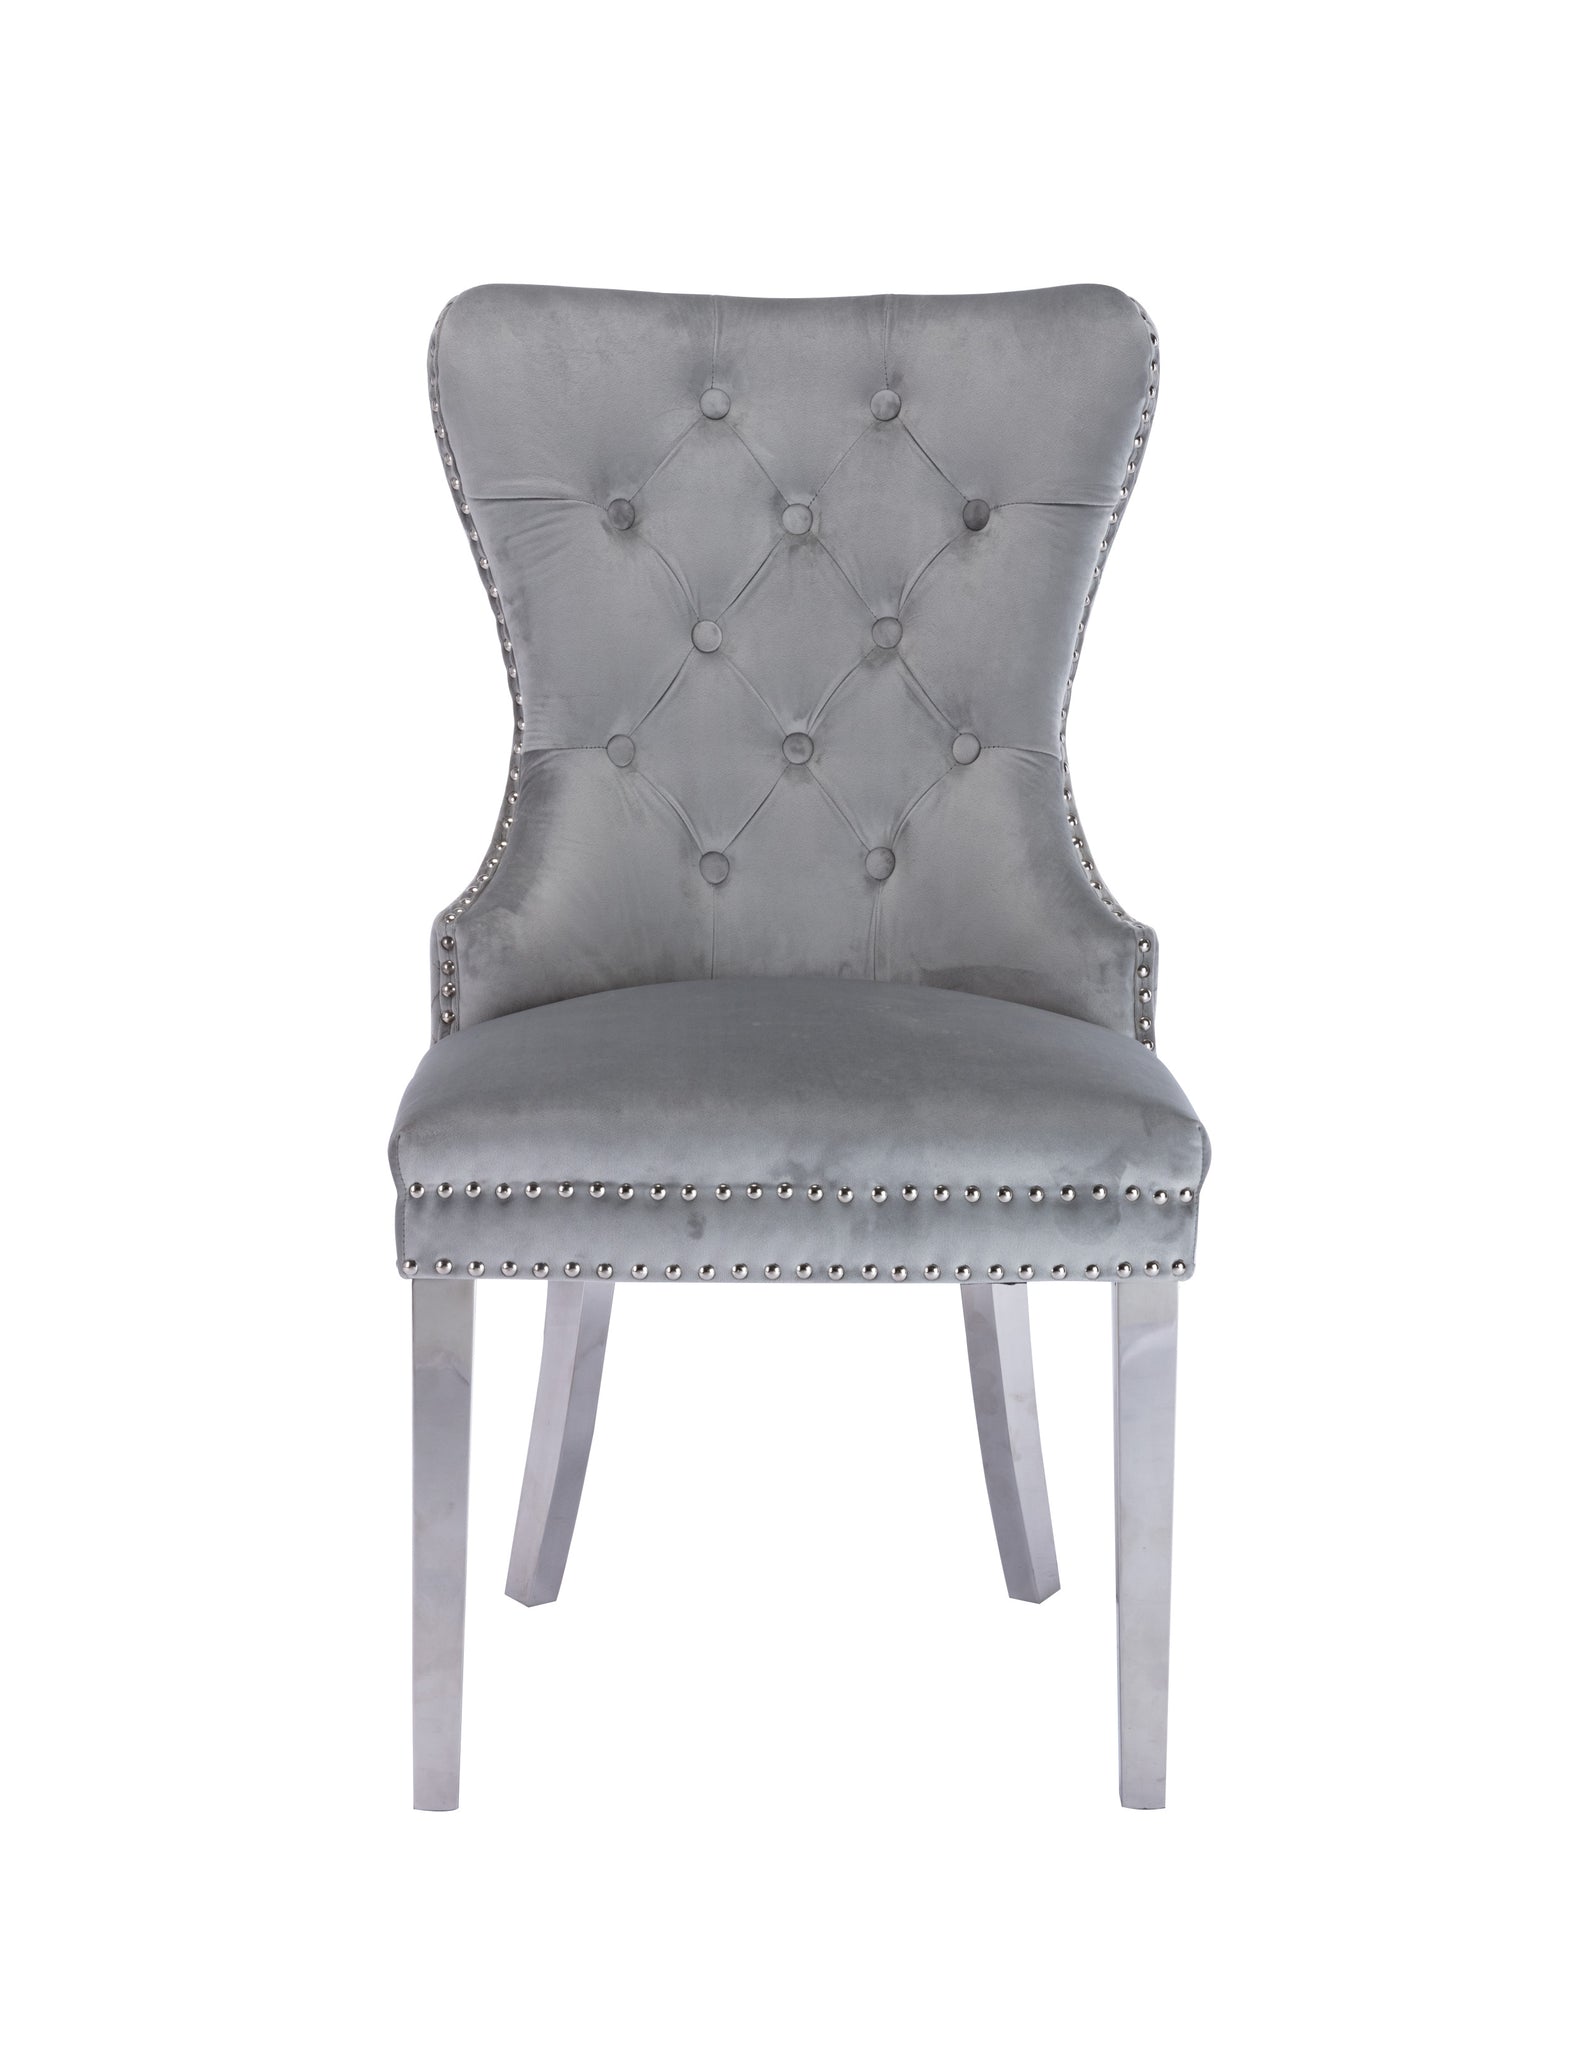 Simba Stainless Steel 2 Piece Chair Finish with Velvet light grey-dining room-contemporary-modern-accent